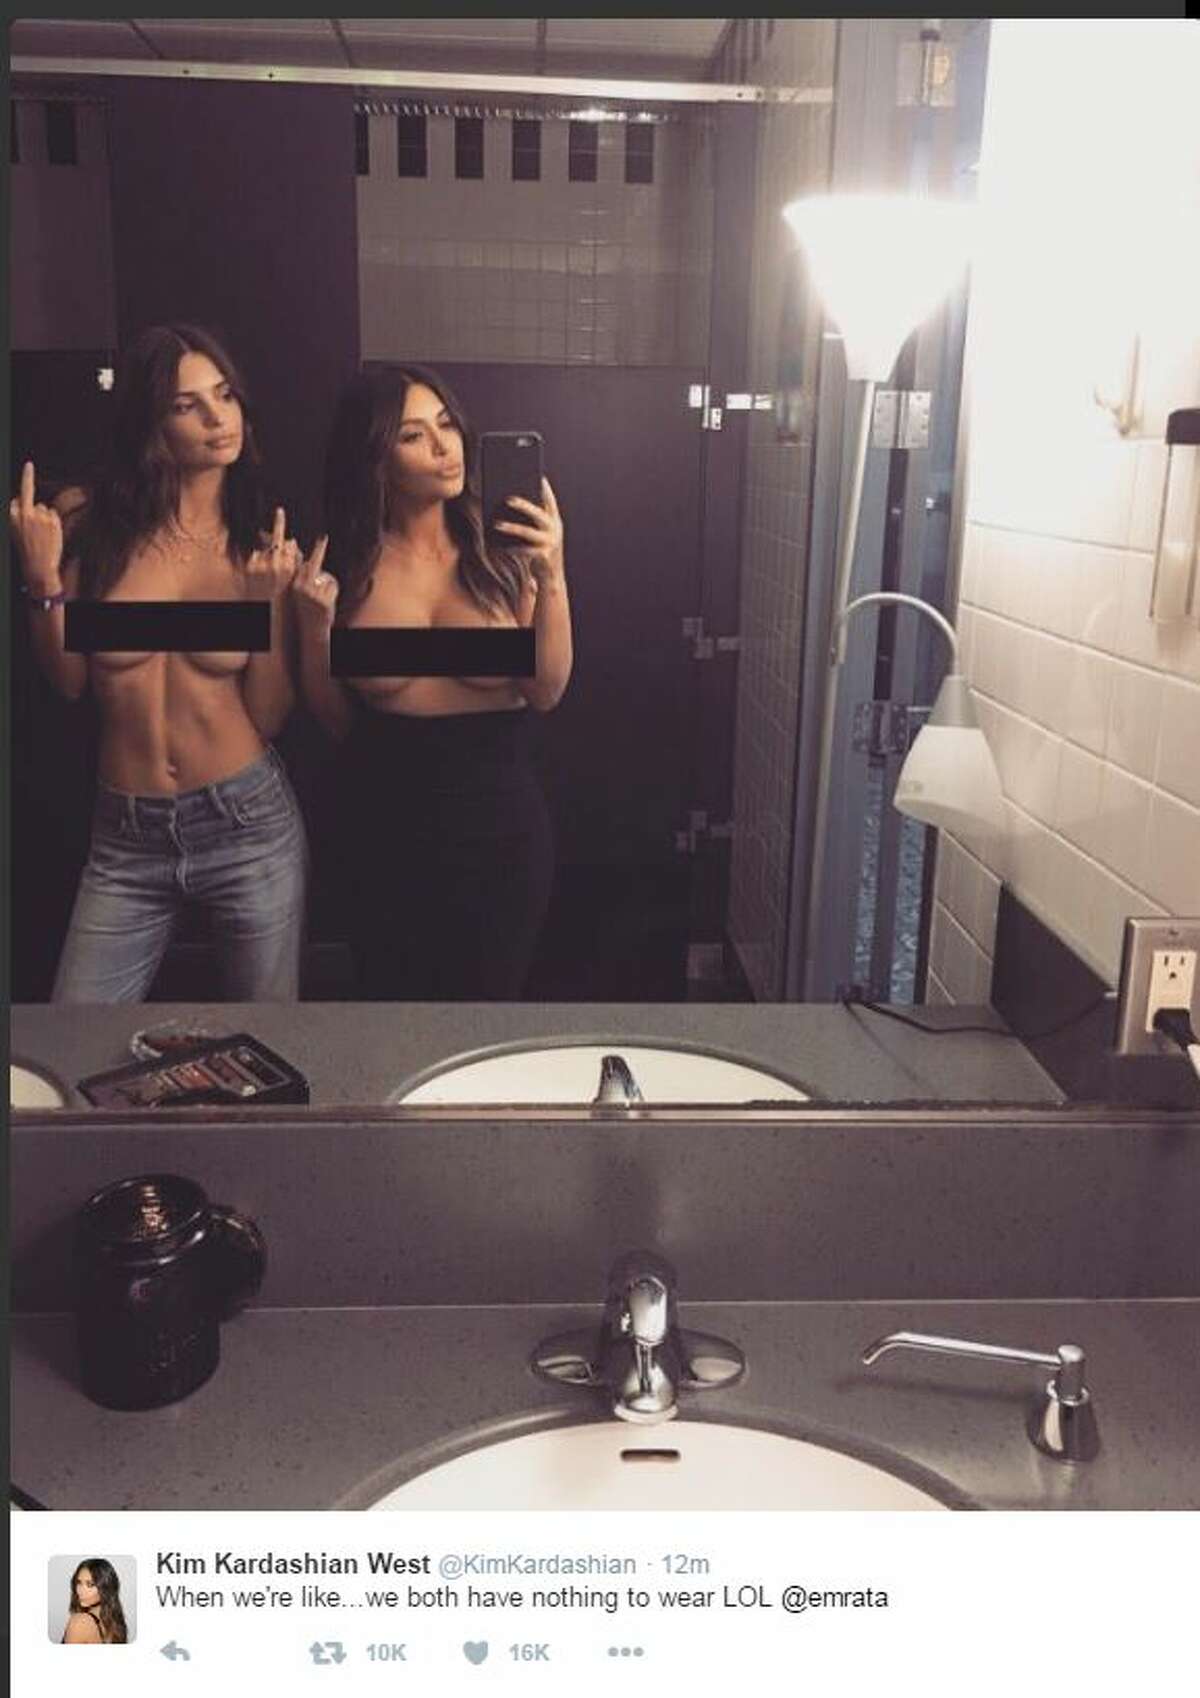 Kim Kardashian and Emily Ratajkowski can't find anything to wear, and they are flaunting their goods on social media.